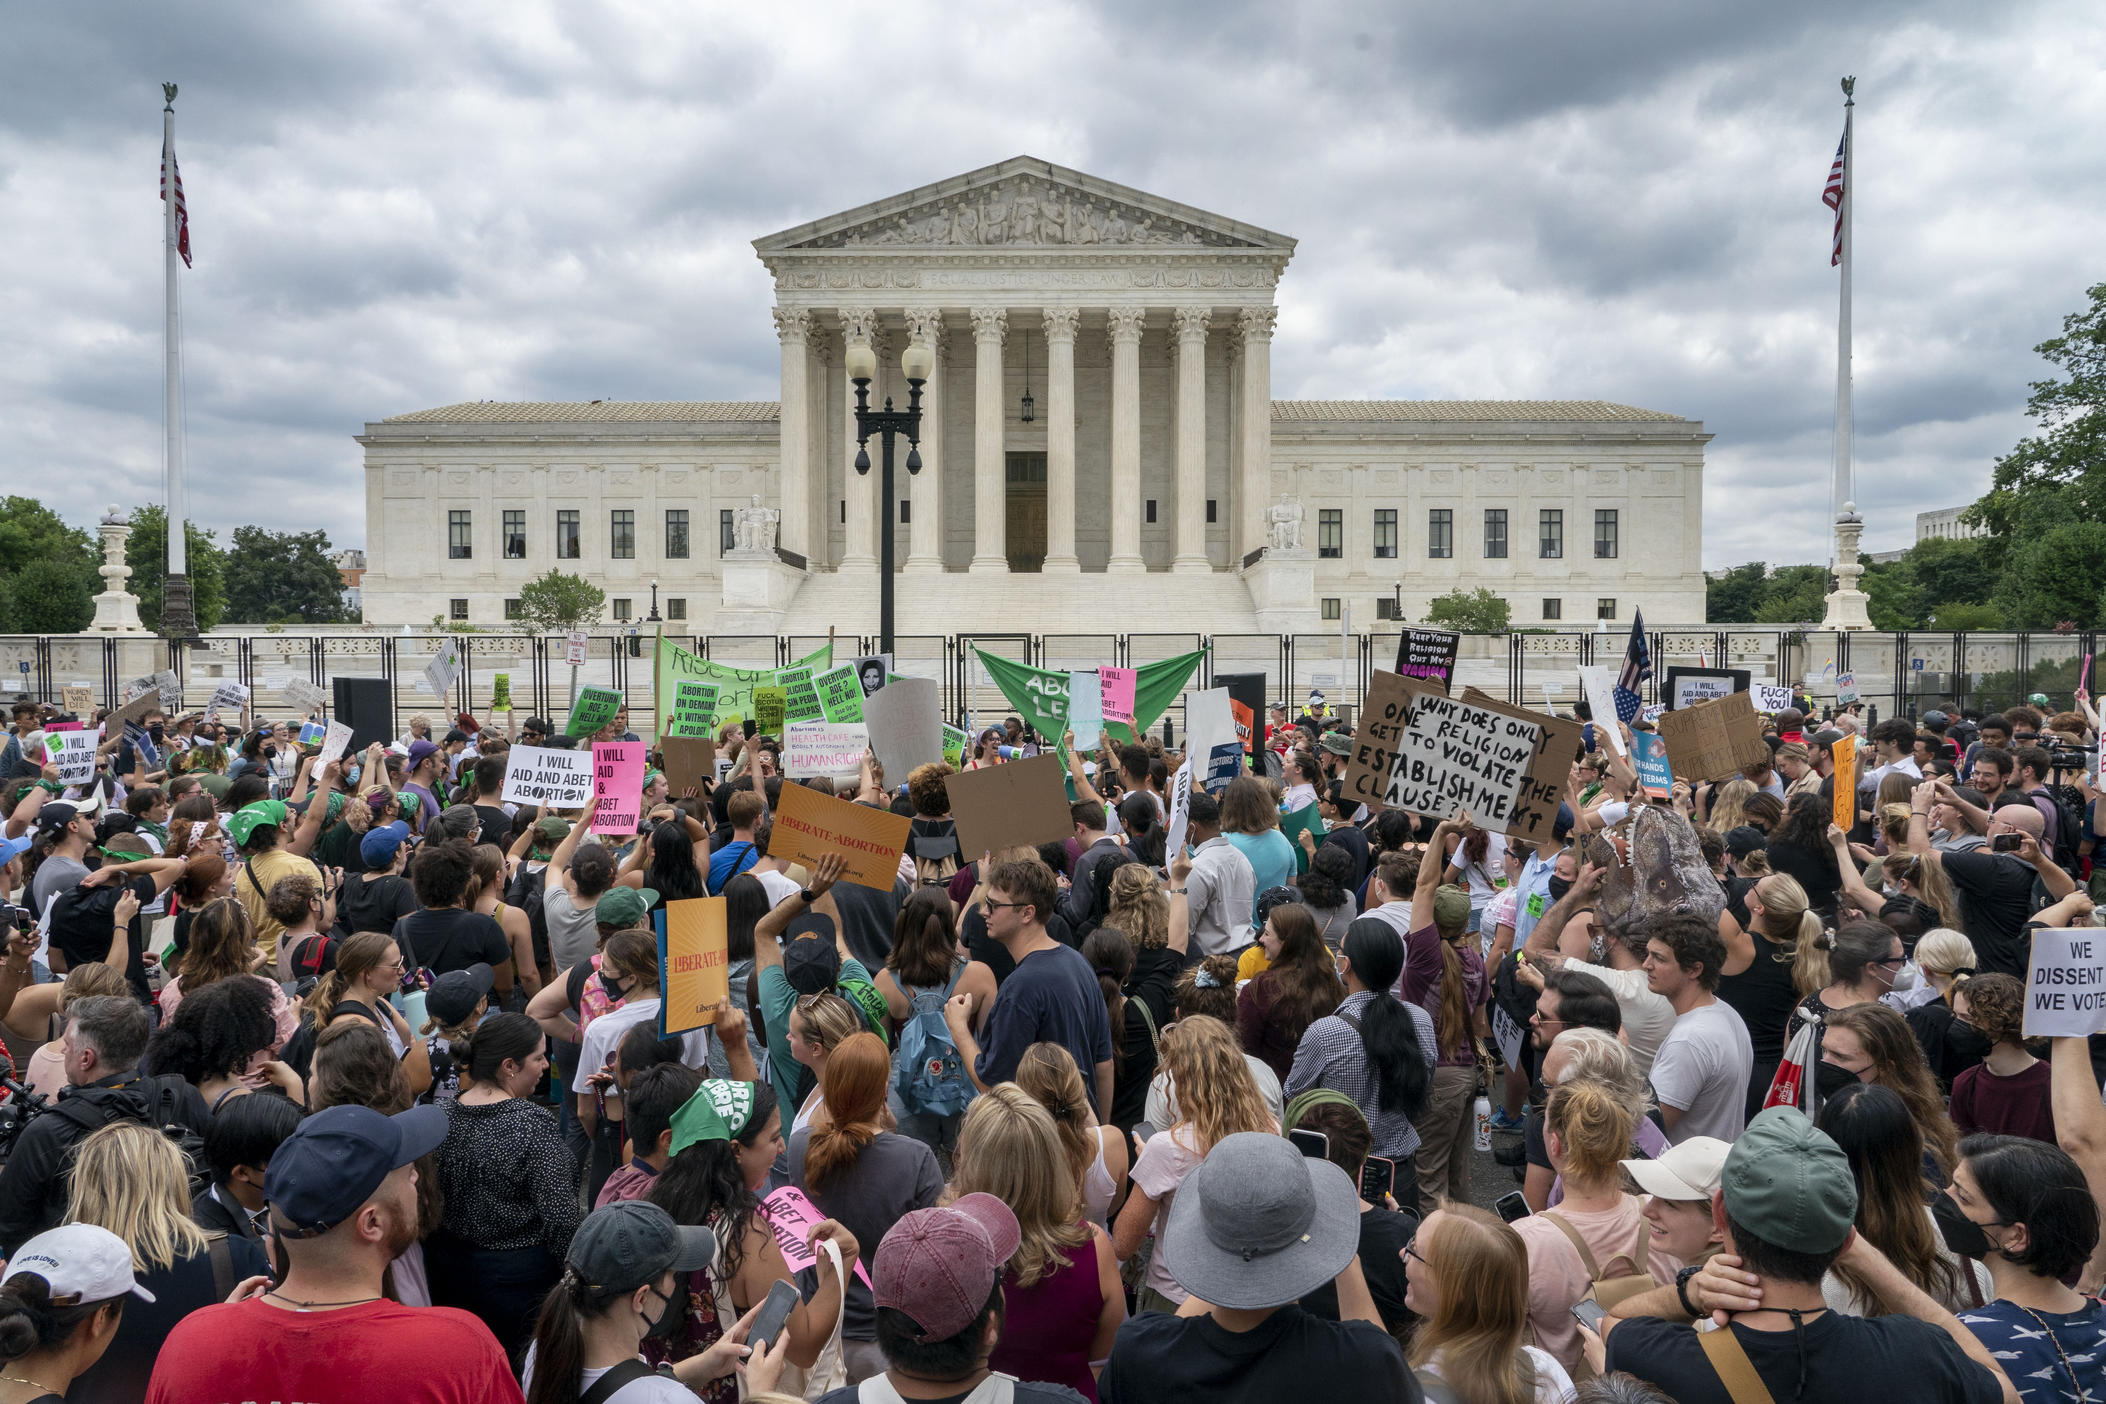 Abortion-rights protesters regroup and protest following Supreme Court's decision to overturn Roe v. Wade, federally protected right to abortion, outside the Supreme Court in Washington, Friday, June 24, 2022.